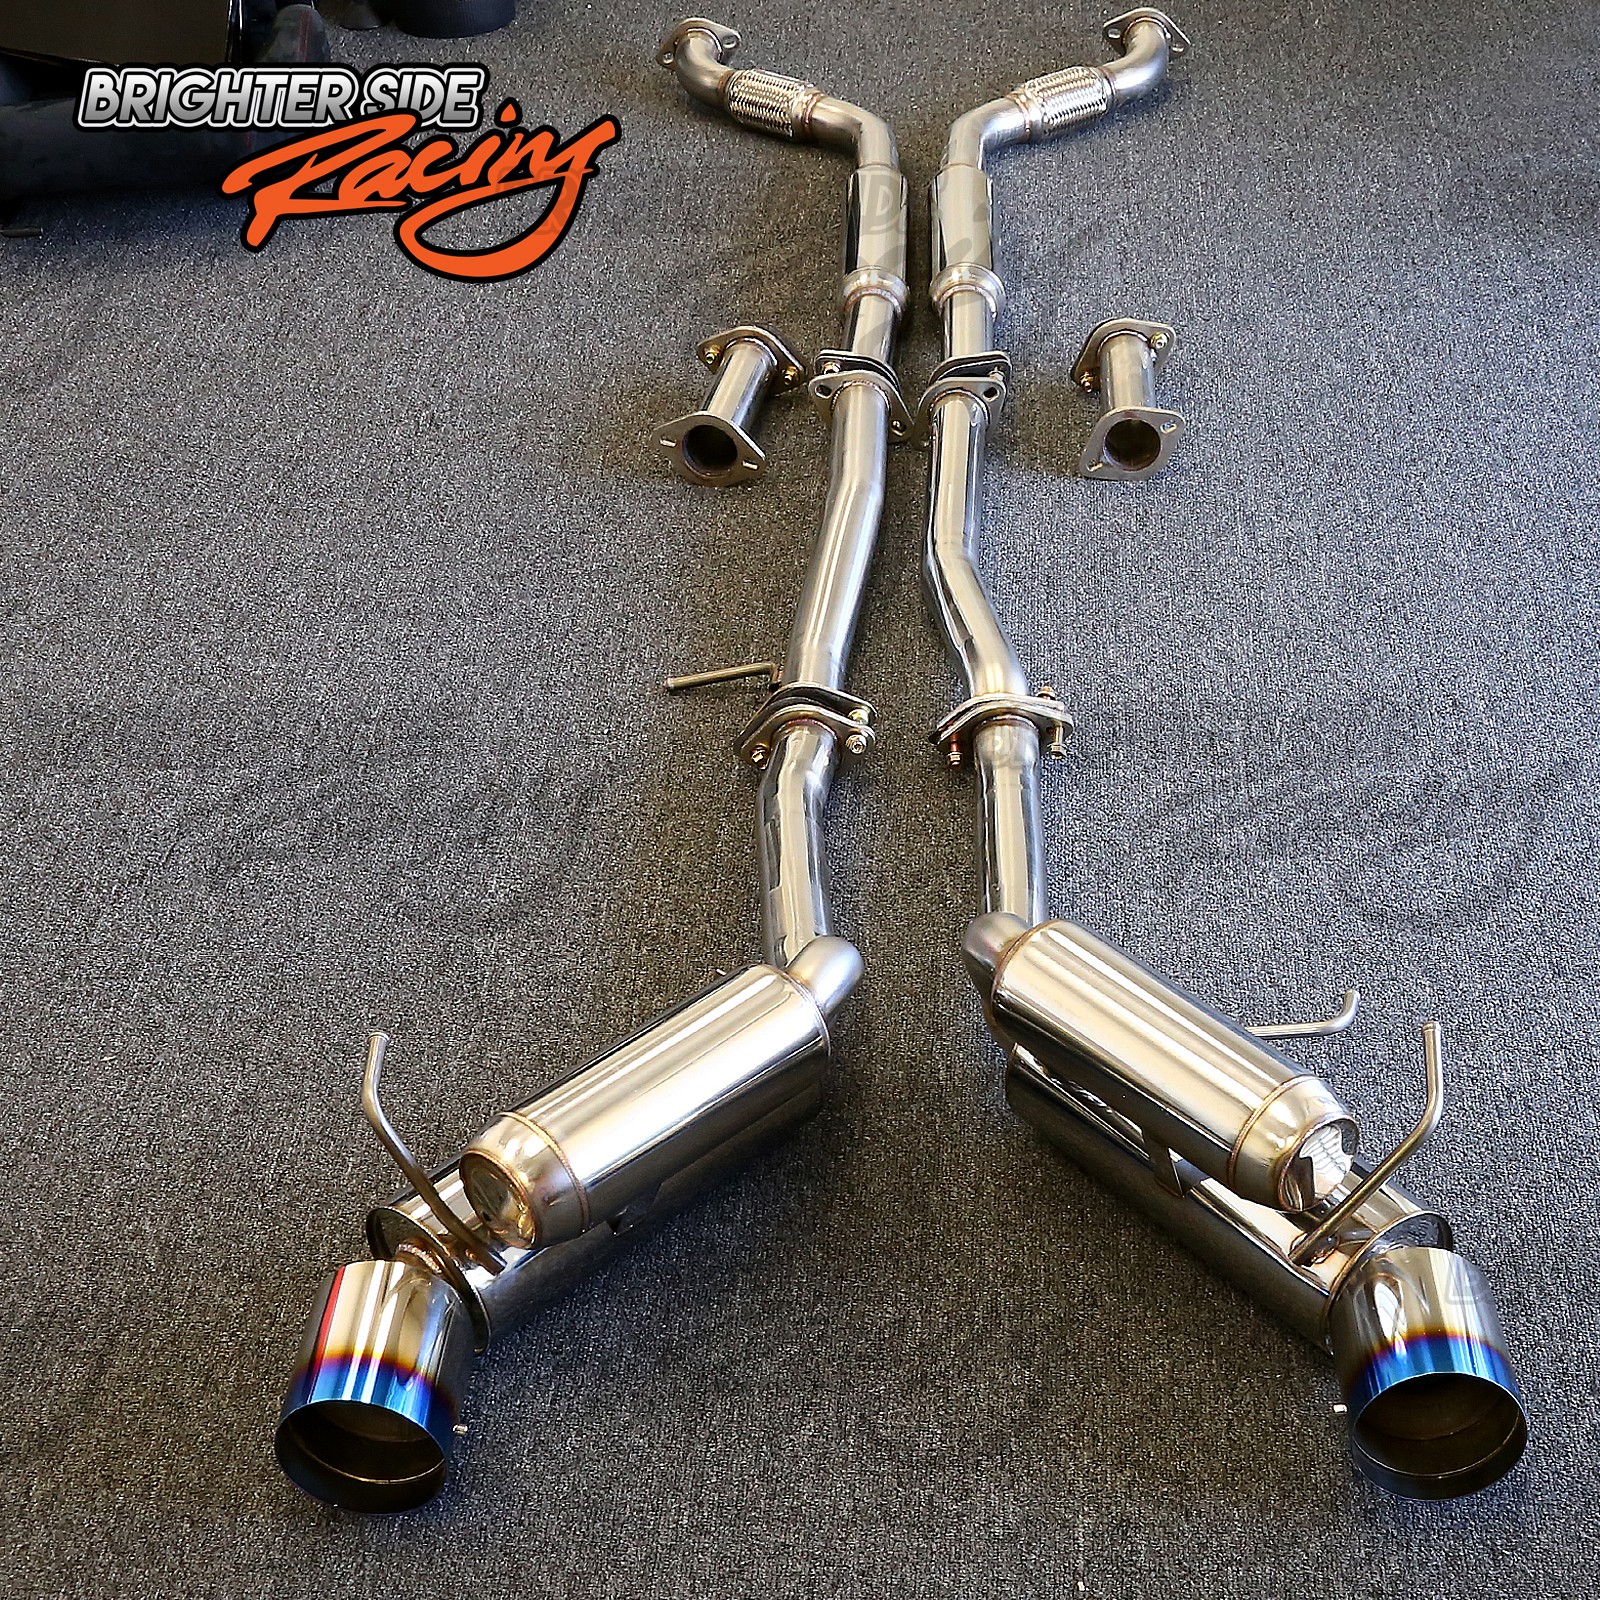 DIRECT FIT 03-07 INFINITI G35 350Z STAINLESS STEEL DUAL EXHAUST CATBACK